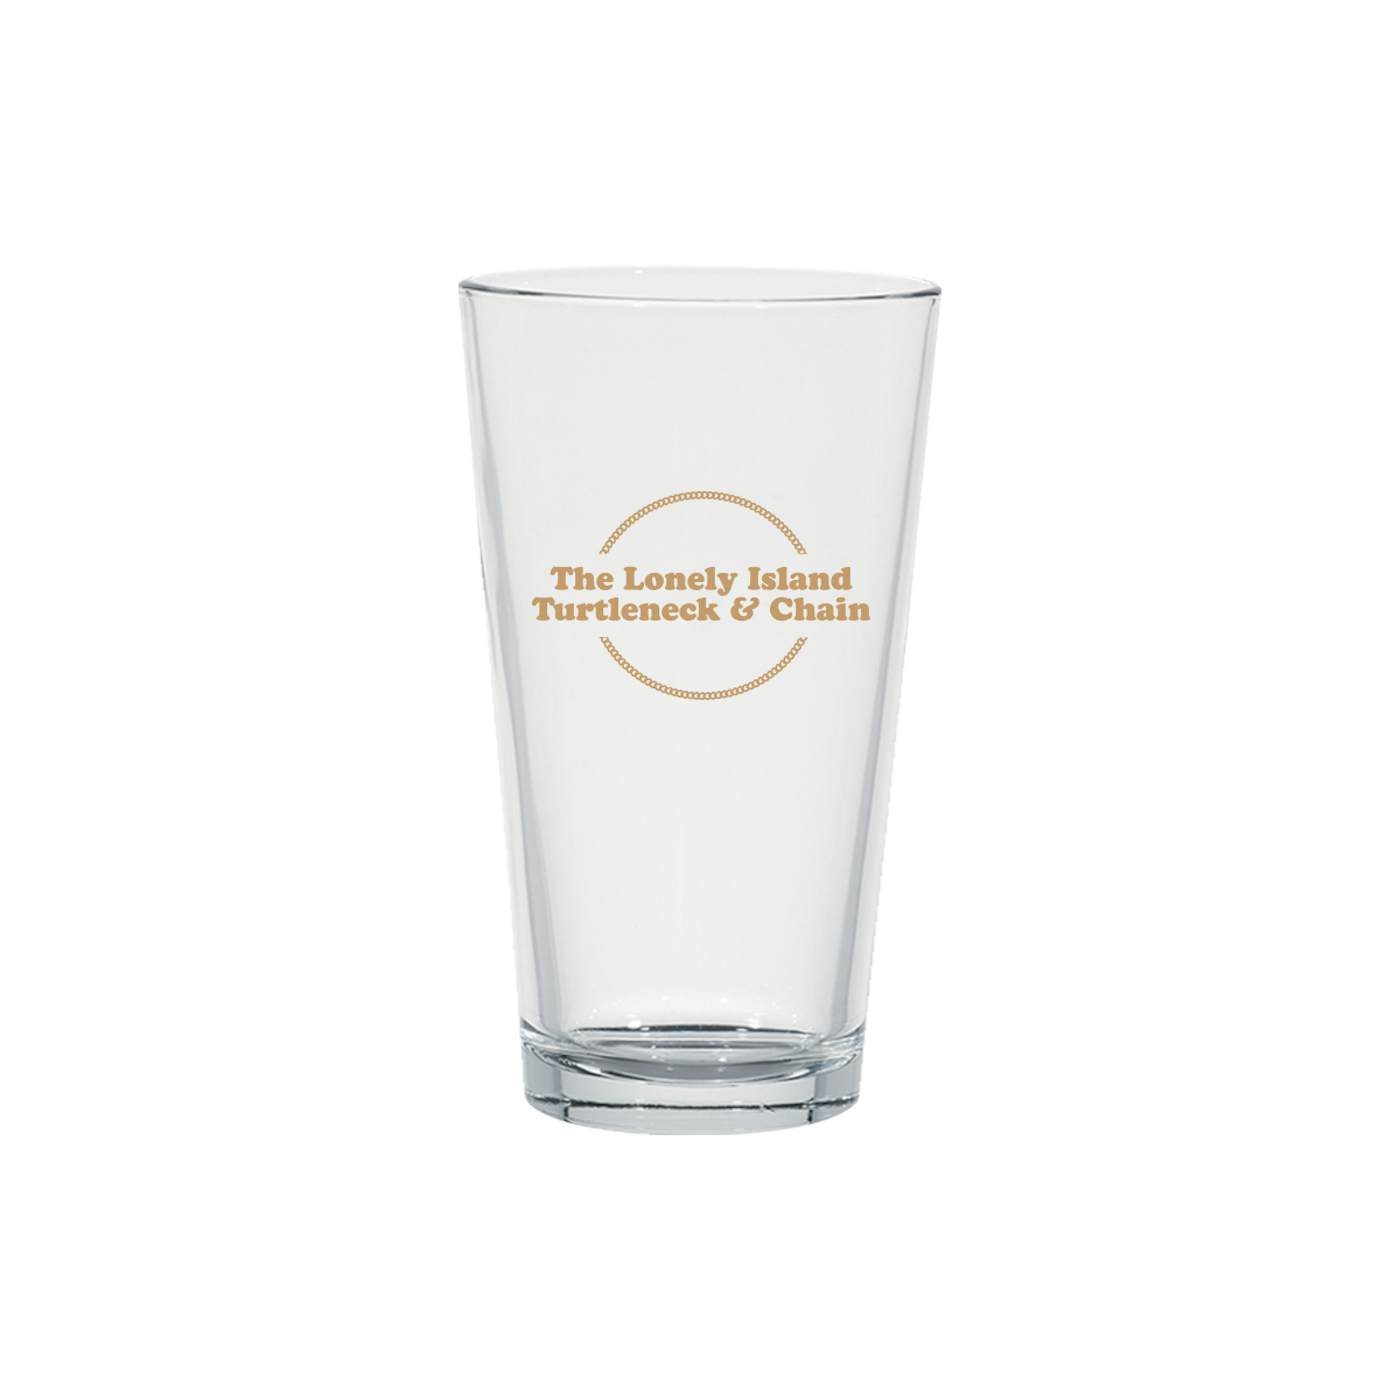 The Lonely Island Turtleneck & Chain Pint Glass